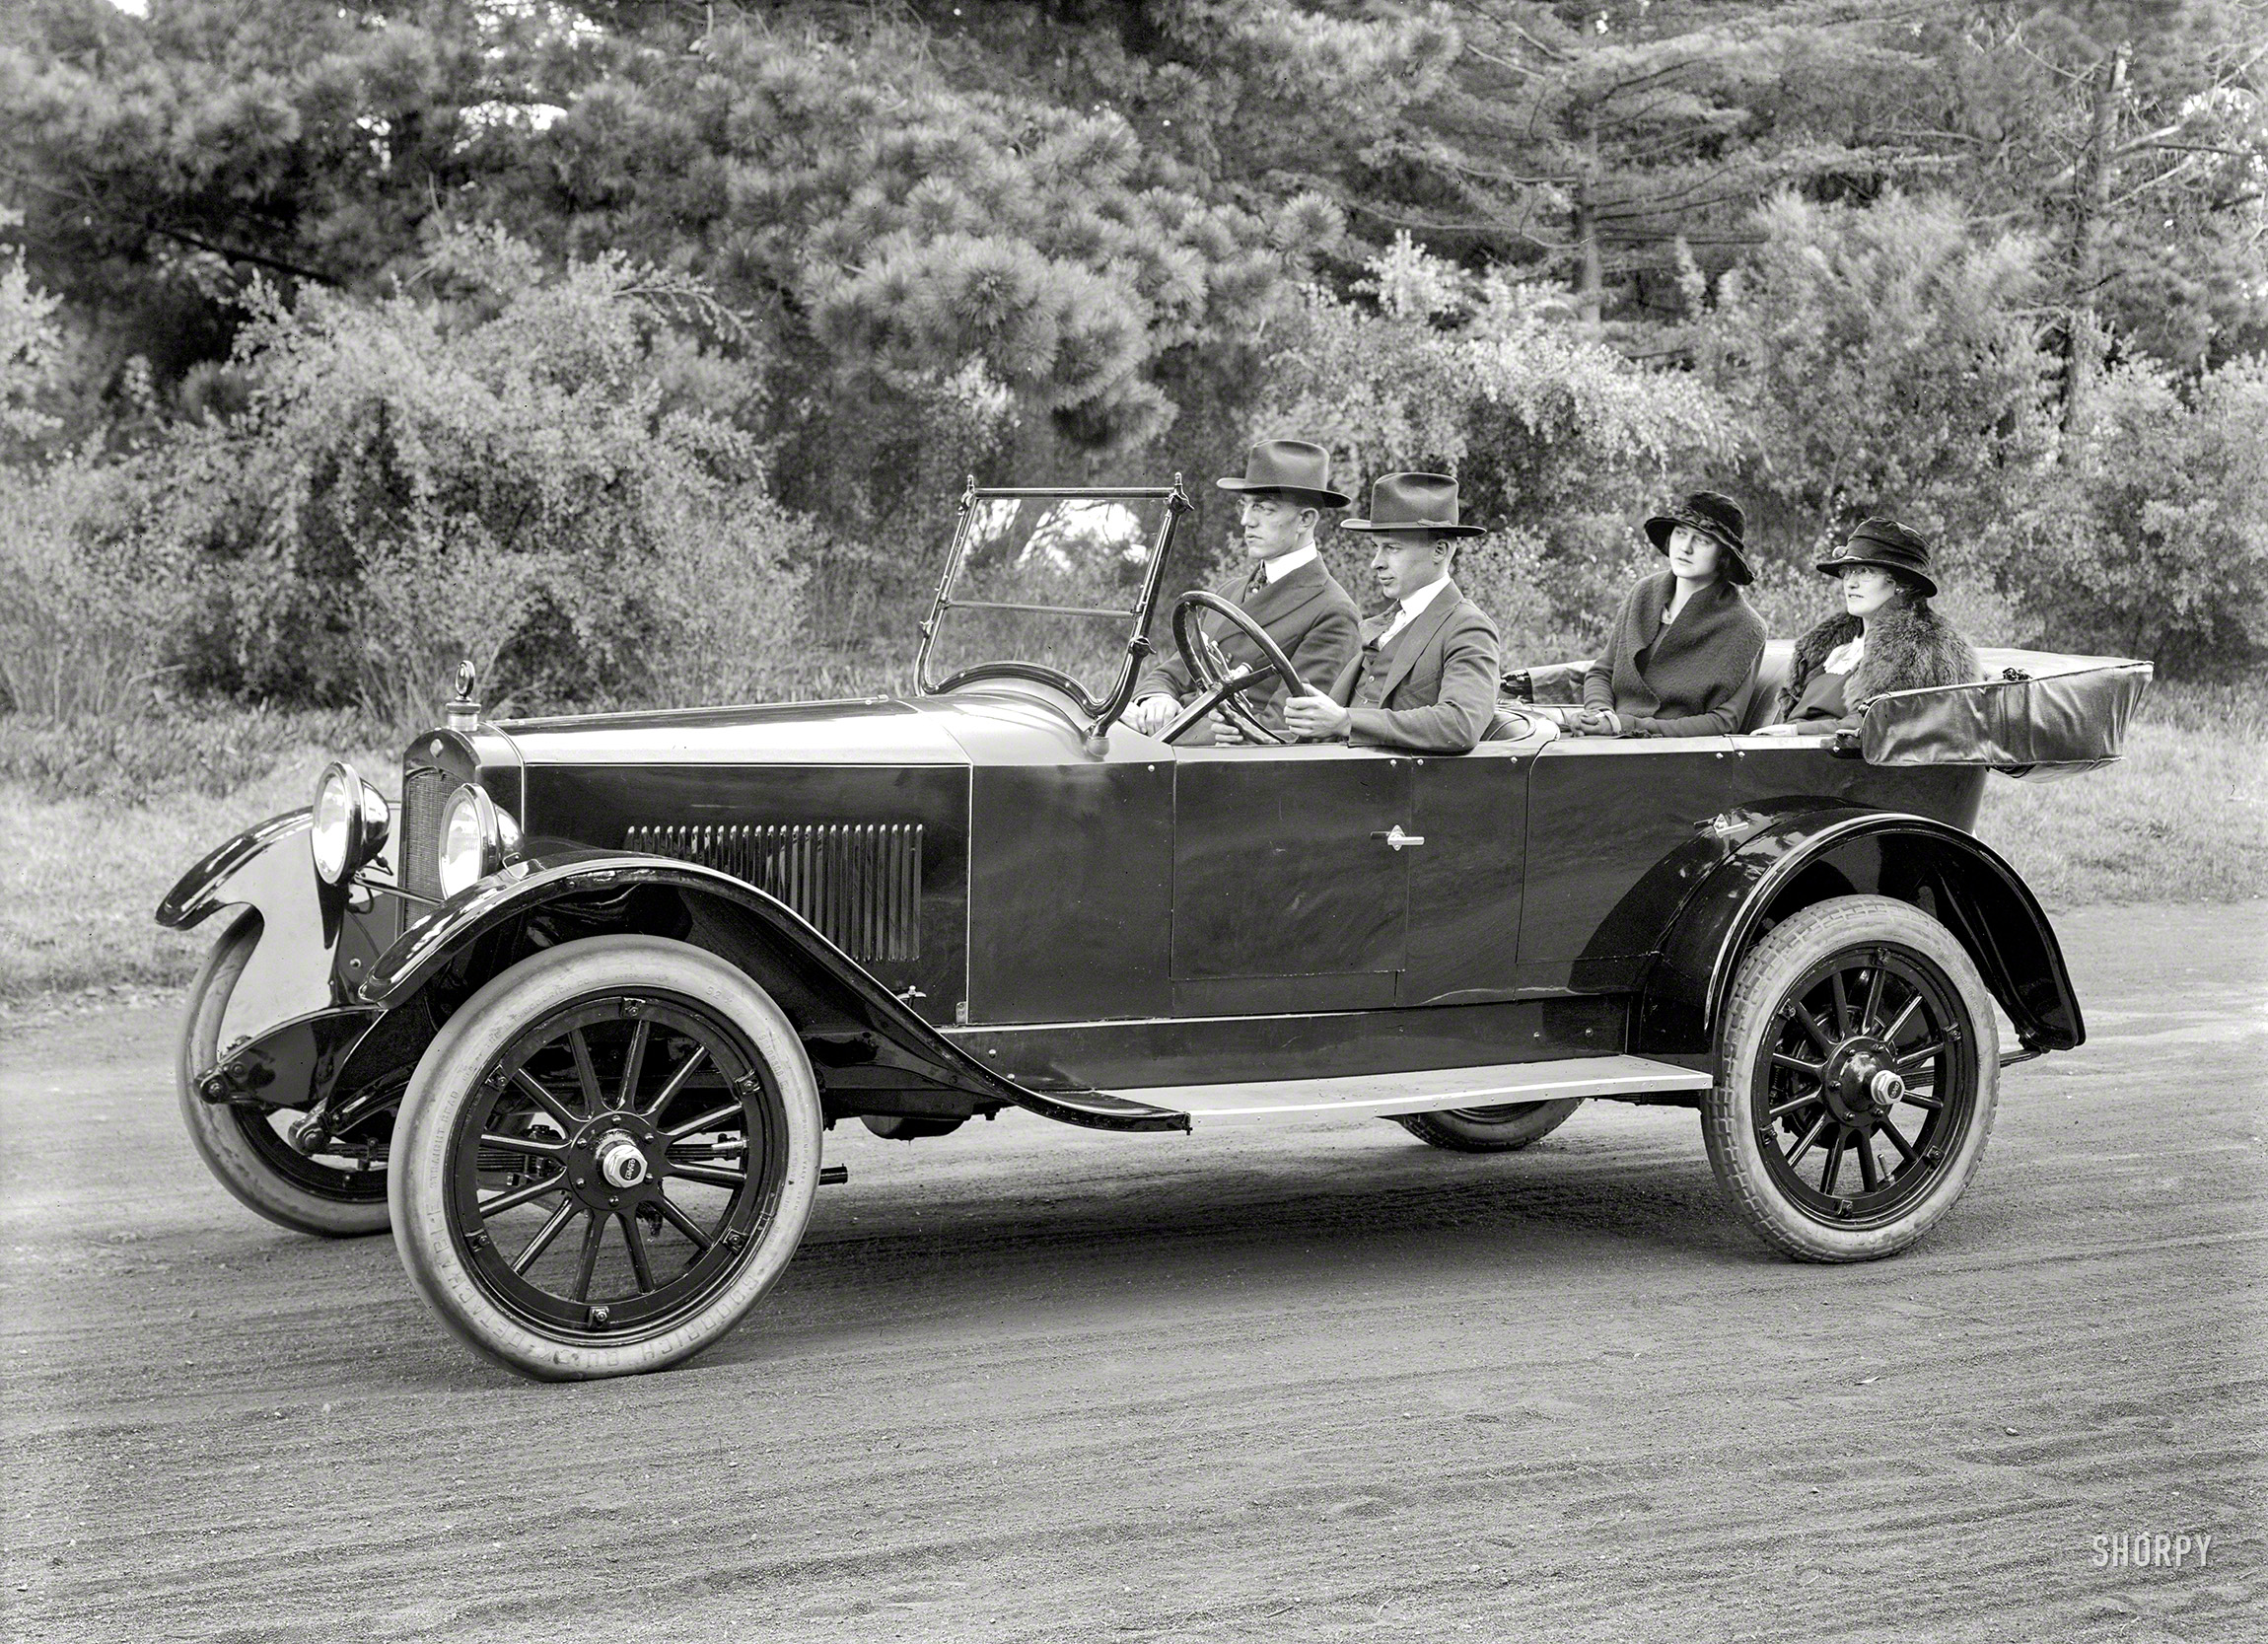 San Francisco circa 1920. "Grant touring car." Latest specimen in the Shorpy Bestiary of Bygone Buggies. 5x7 glass plate by Christopher Helin. View full size.